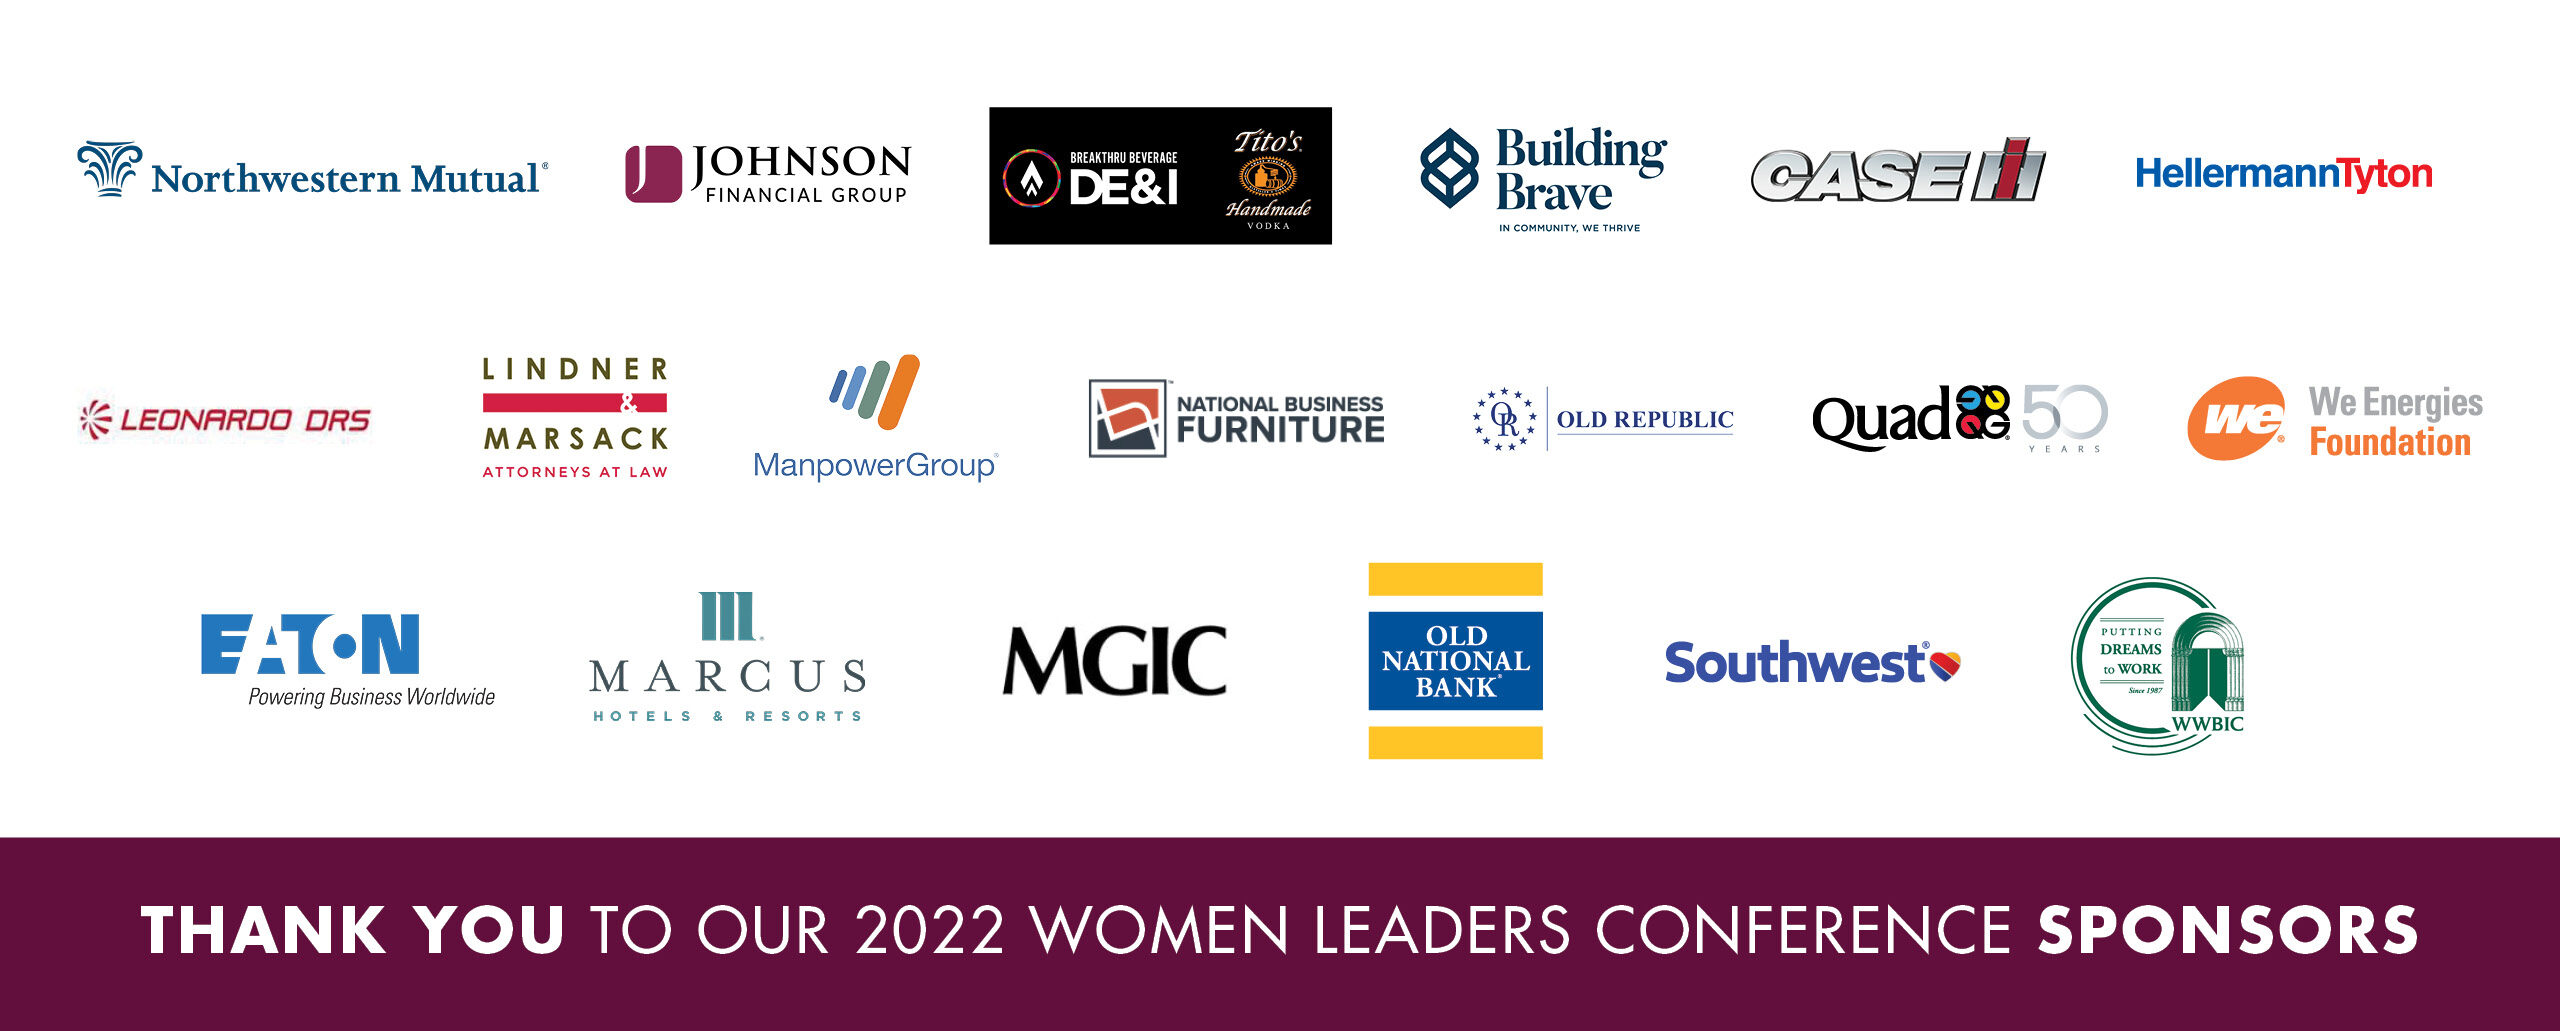 Thank You to Our 2022 Women Leaders Conference Sponsors